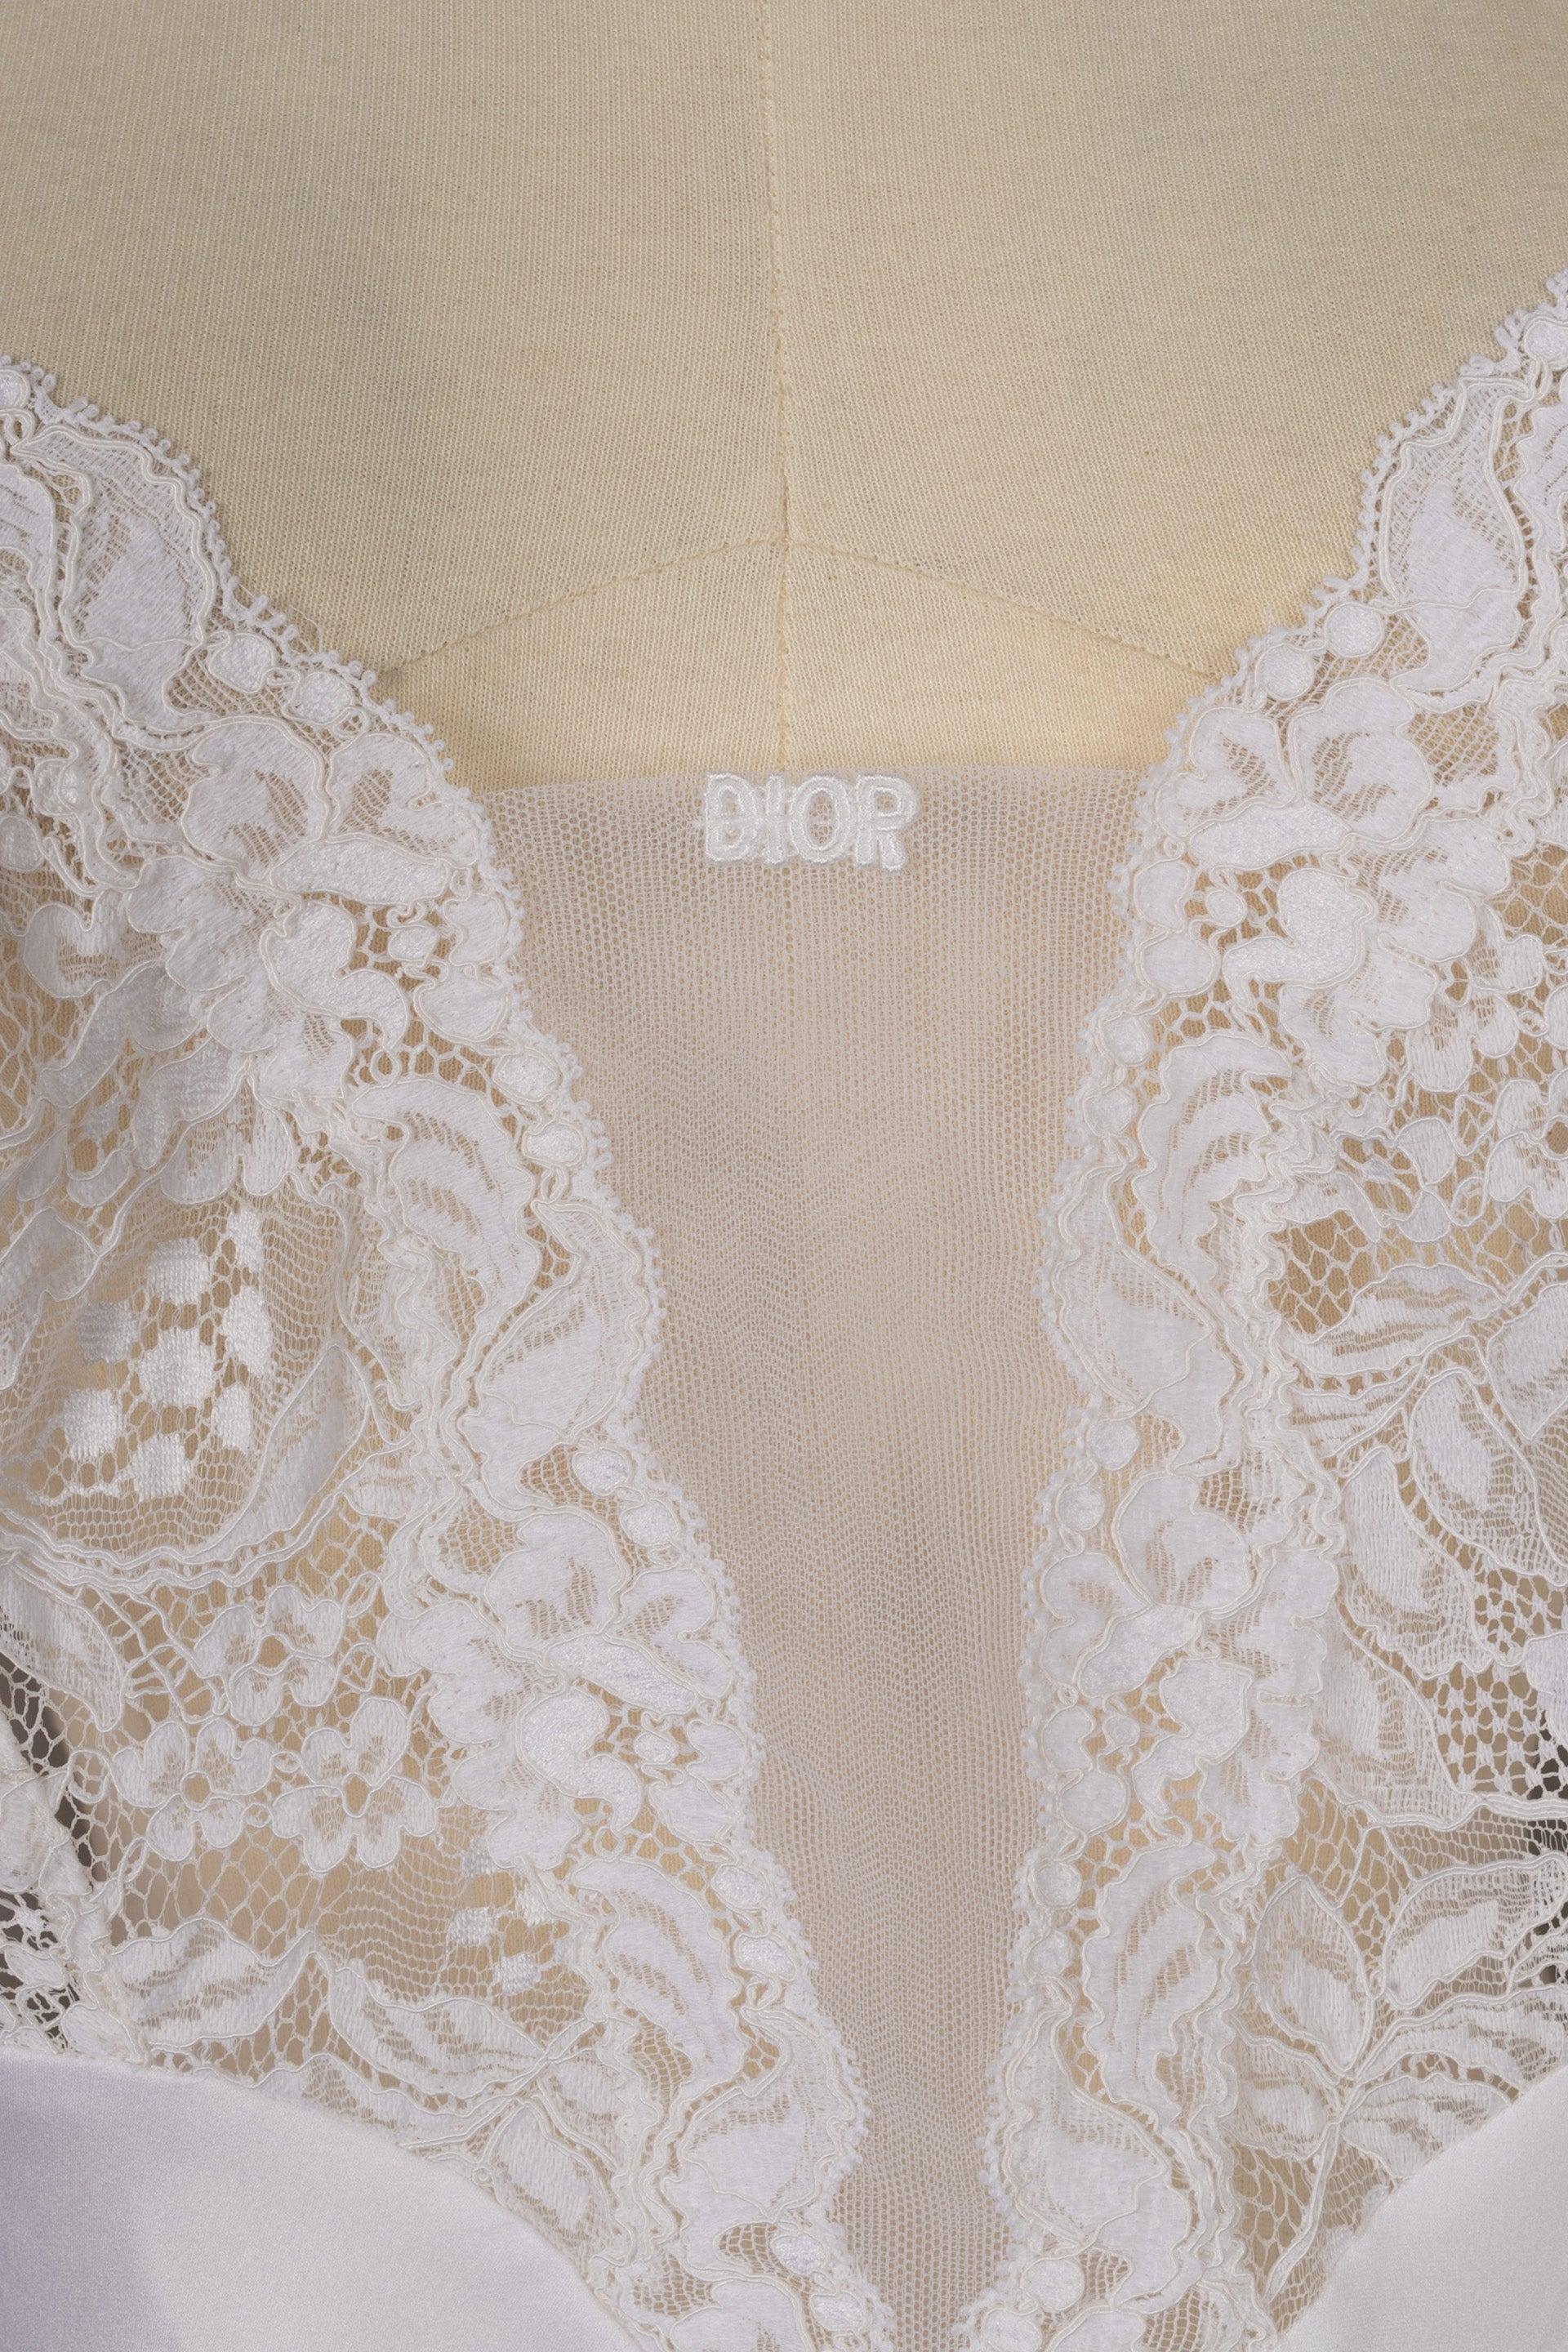 Dior White Lace Babydoll 1